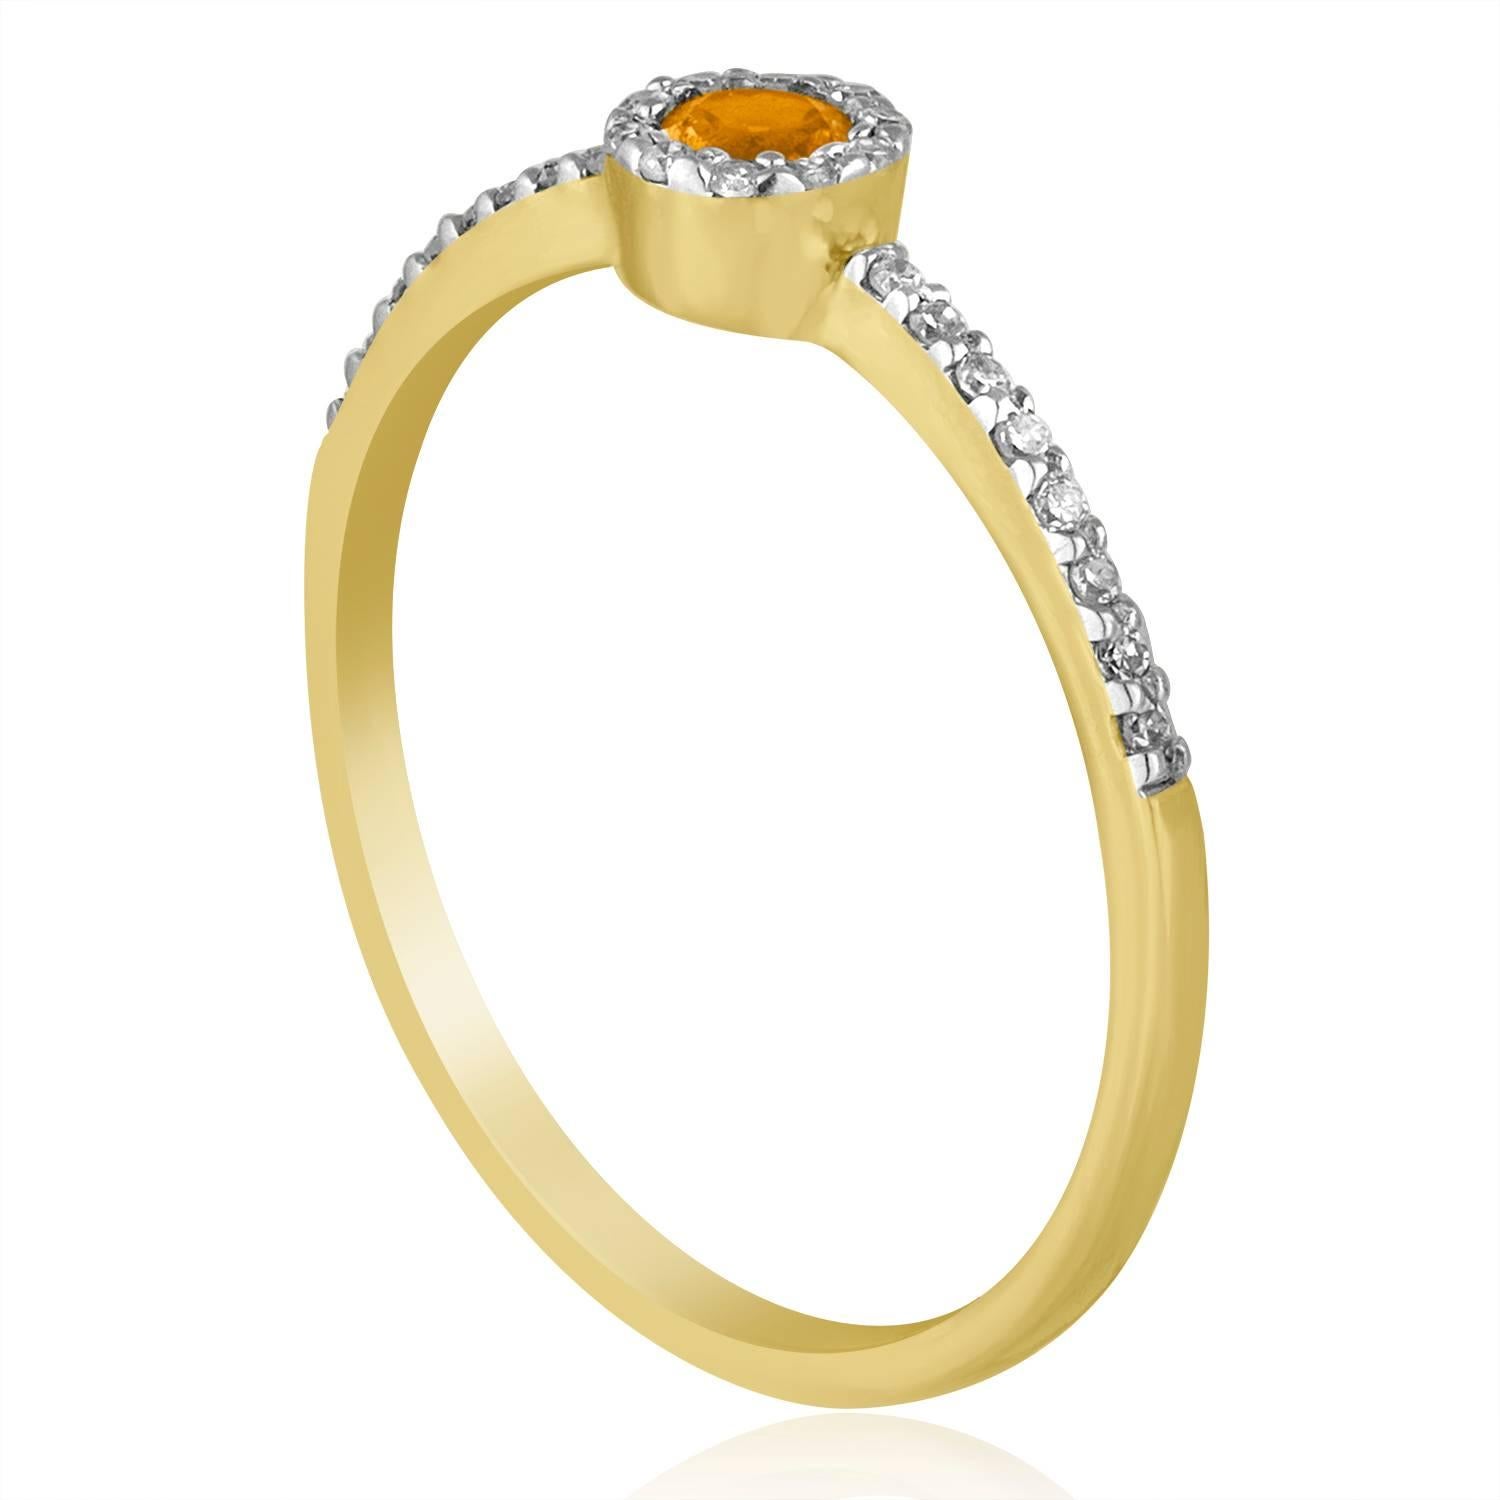 Stackable Citrine Ring
The ring is 14K Yellow Gold
There are 0.08 Carats In Diamonds H SI
The Center Stone is Round 0.12 Carat Citrine
The top measures 3/16